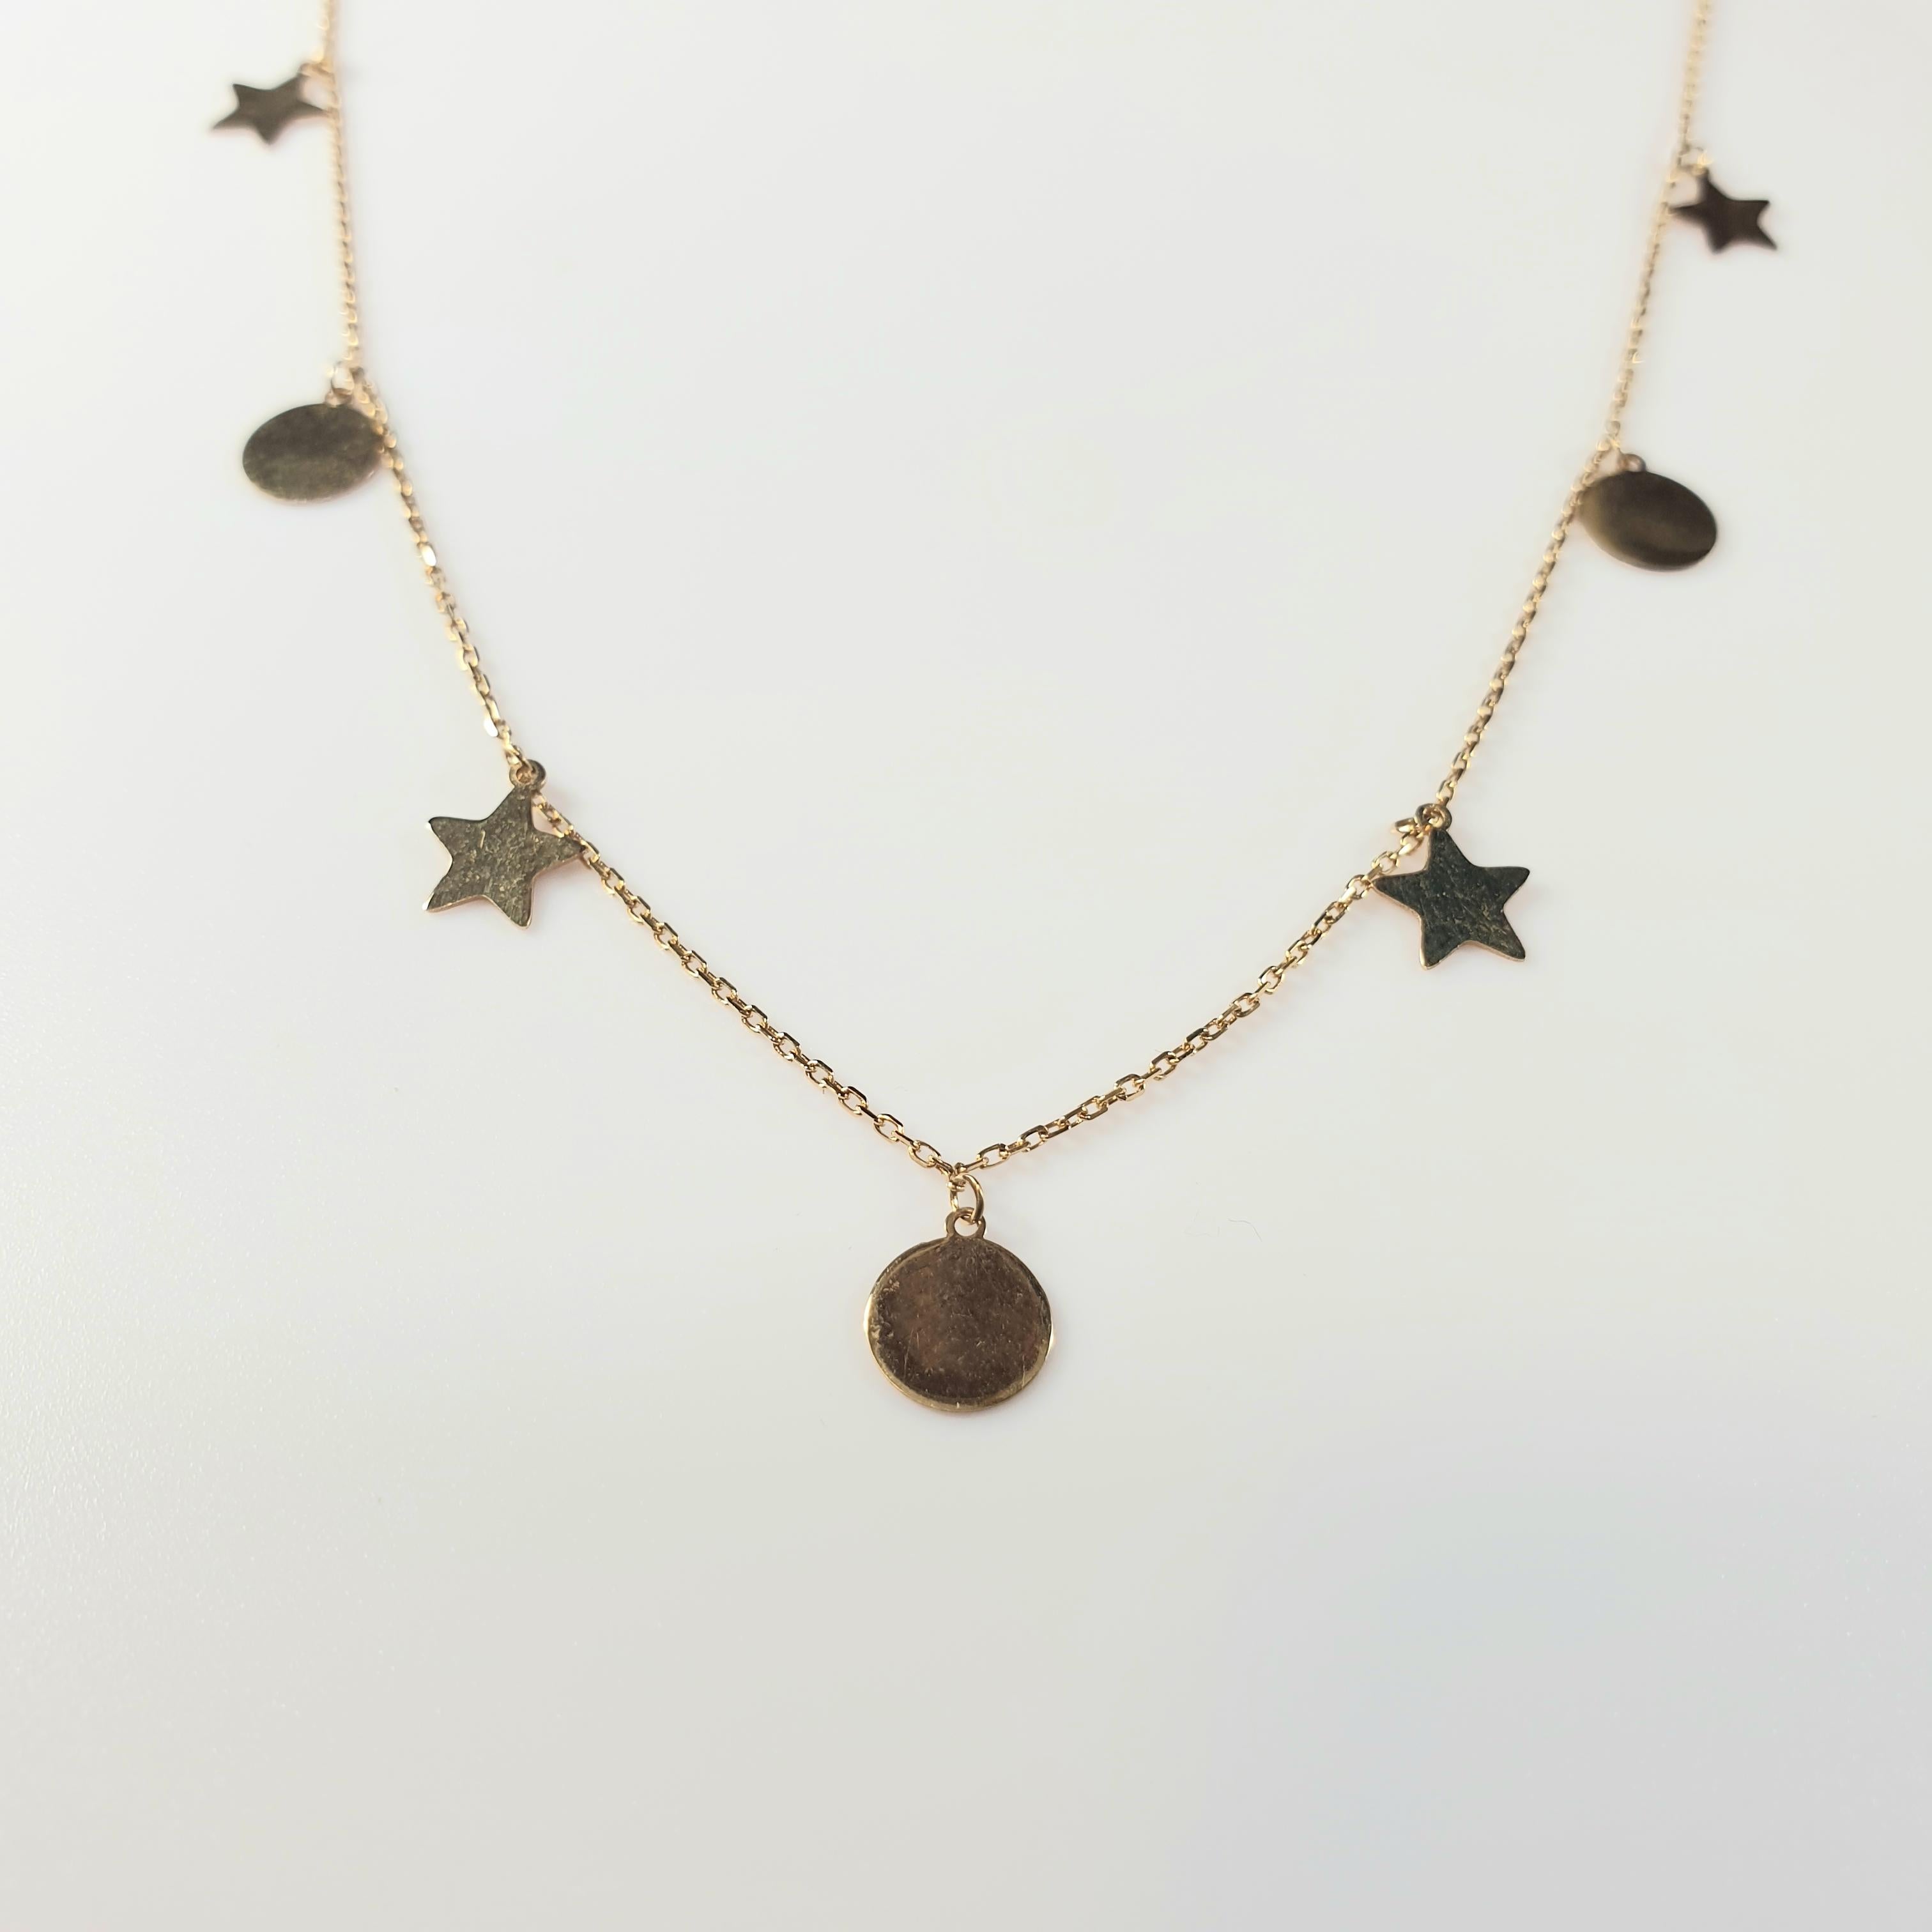 Sea Star Charm collection, inspired in the Mediterranean sea colours and gold tokens ....

READY TO SHIP
*Shipment of this piece is not affected by COVID-19. Orders welcome!

MATERIAL
◘ Weight 2 grams with chain
◘ Chain lenght 43cm /40cm or 16,92